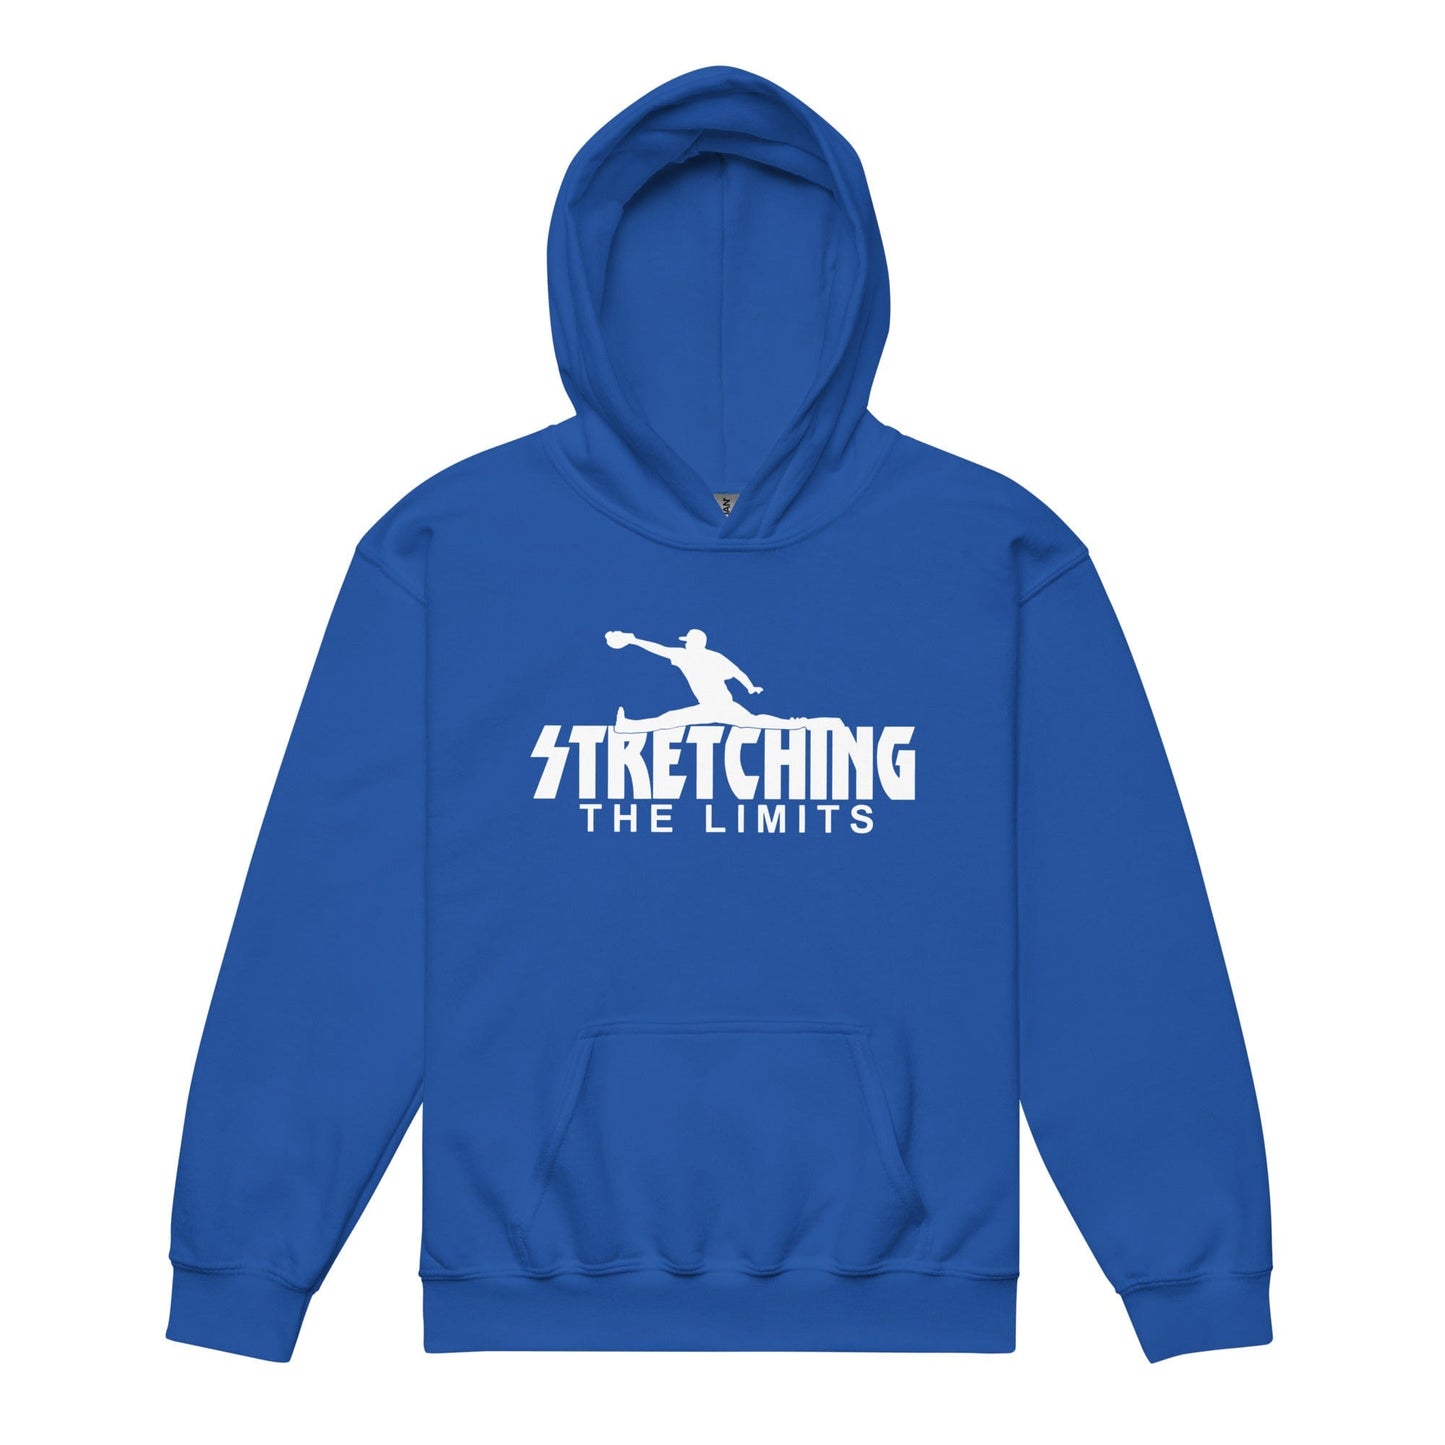 Stretching The Limits - Youth Hoodie